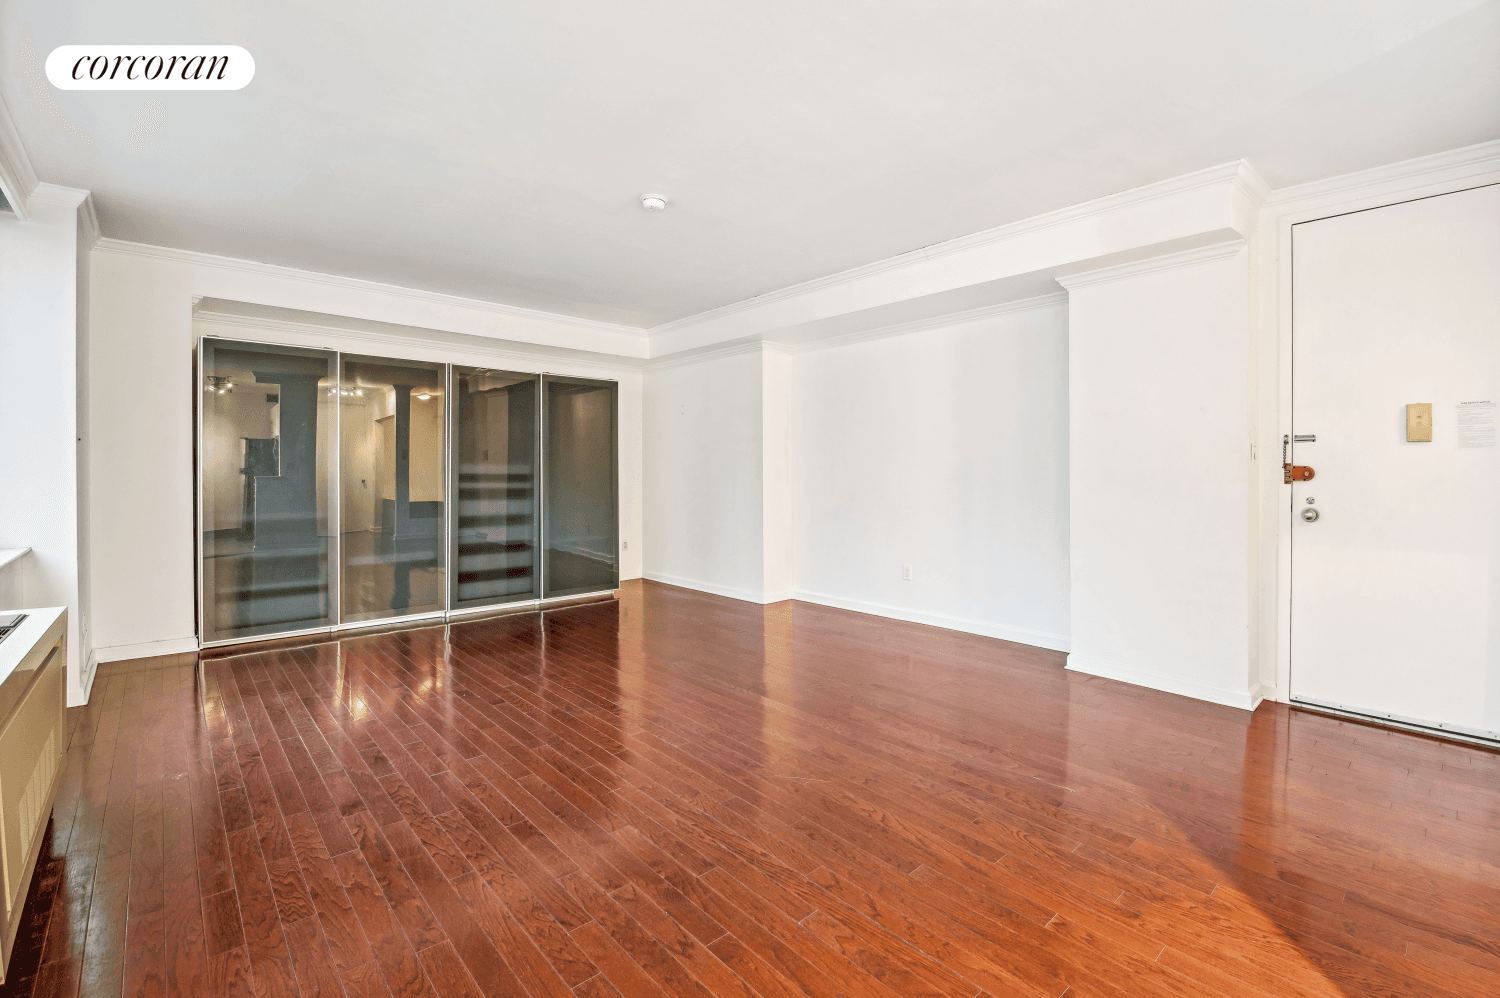 New Lower Price 520, 000Welcome to the Largest Studio in Battery Park CityOwner Says SellOver Sized East Facing WindowsWelcome to 12F, a loft like studio in a very private building.